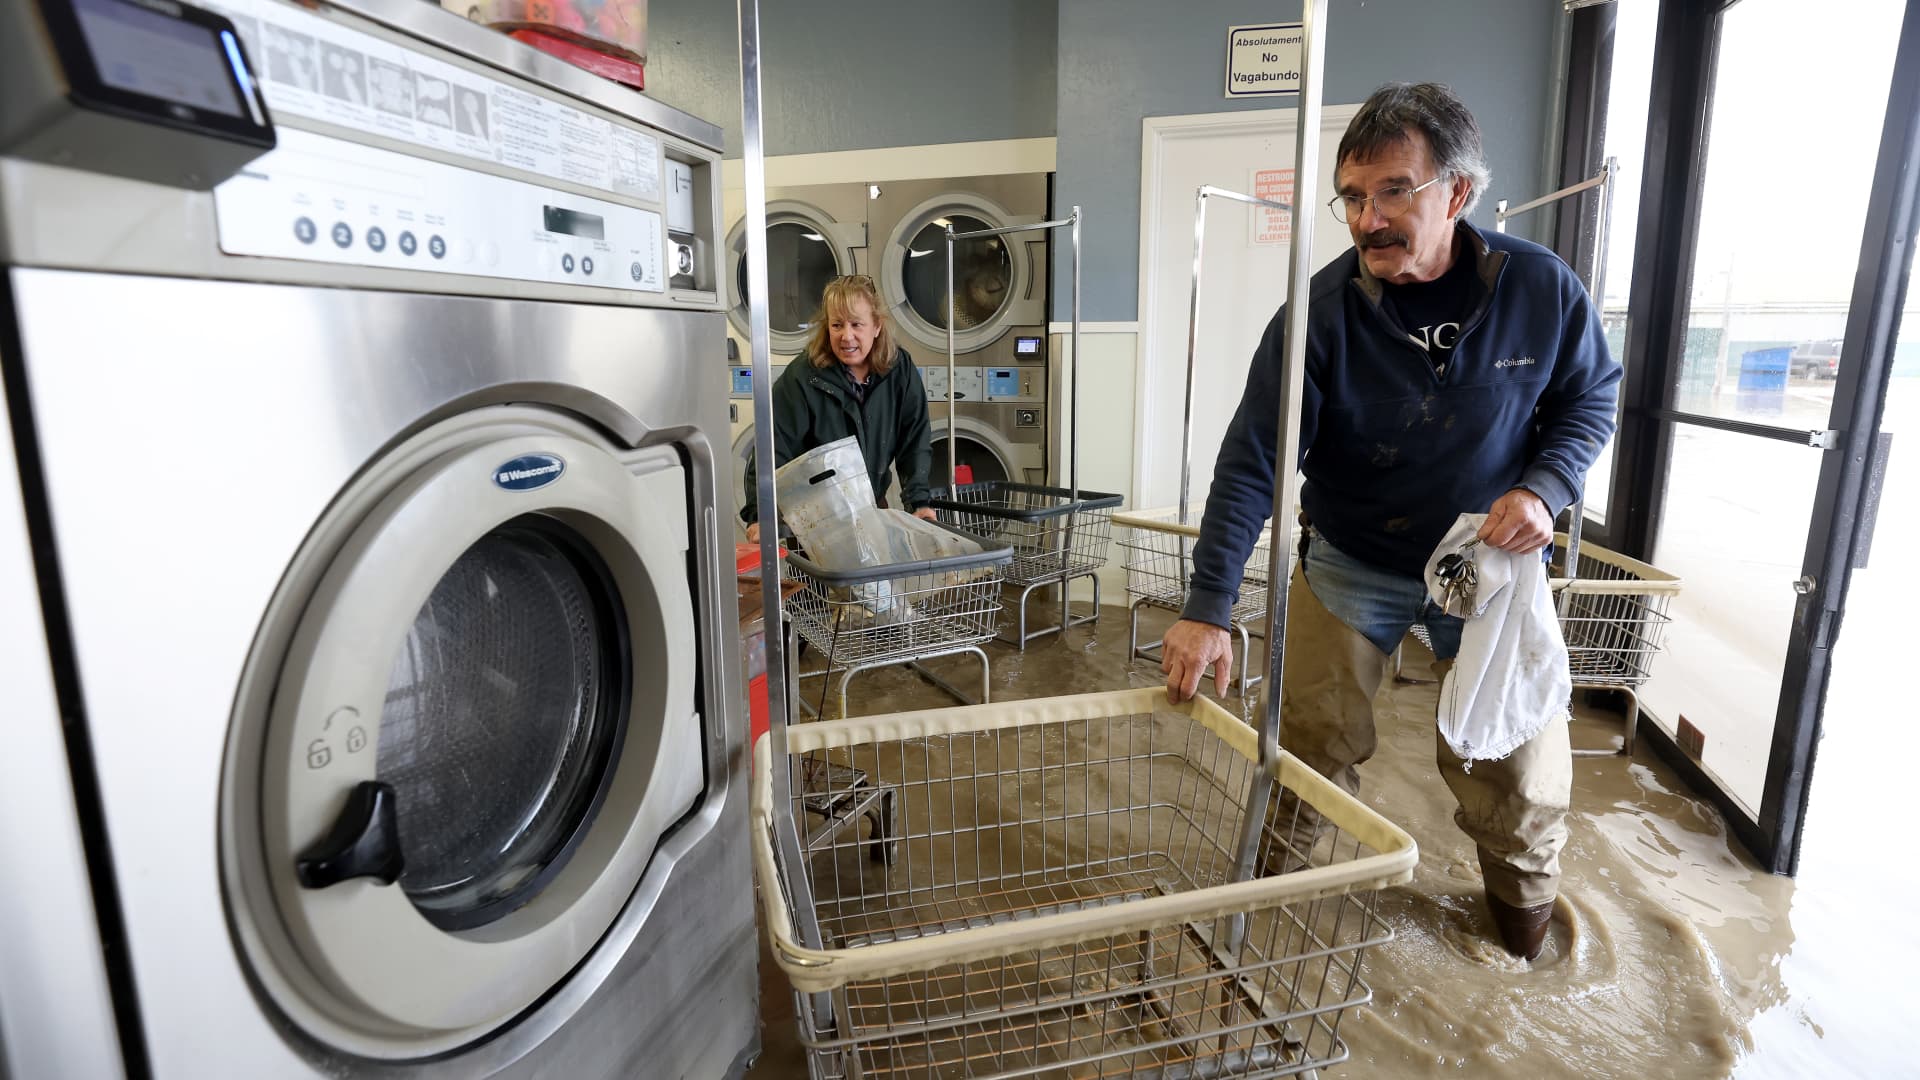 Patrick Cerruti (R) and his wife Pamela Cerruti take coins out of washing machines inside the flooded Pajaro Coin Laundry on March 14, 2023 in Pajaro, California.